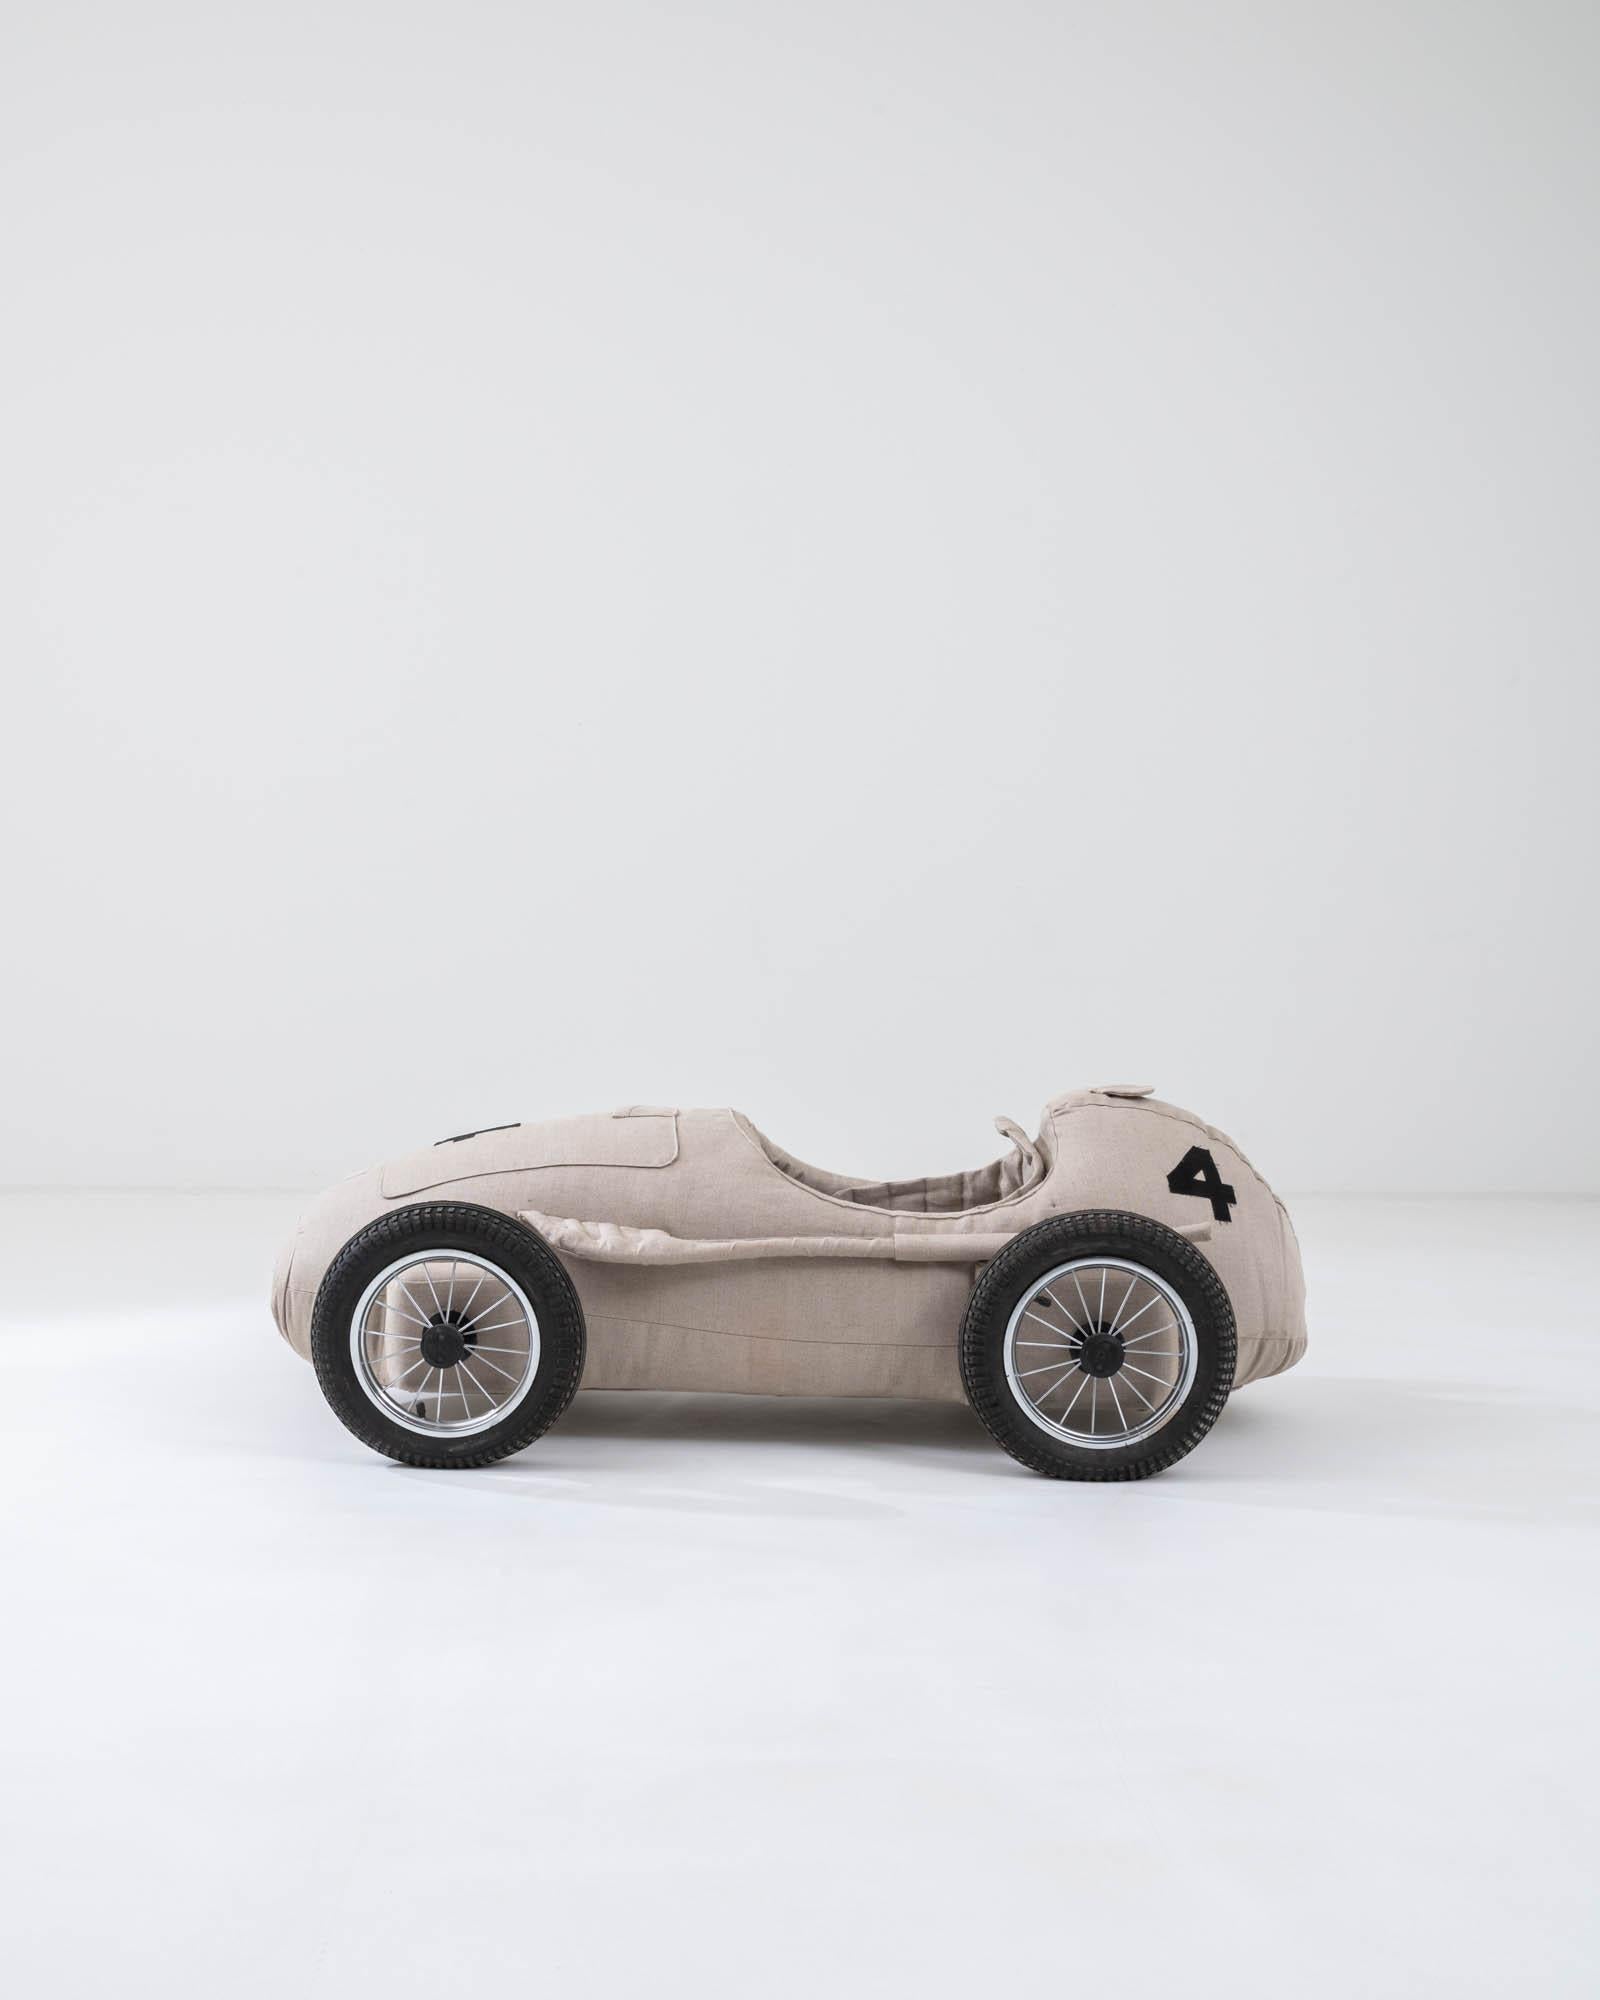 Both playful and oddly mechanical, this quirky race car is full of character and witty design. Lovely design-inspired details such as a sewn hood and side exhaust pipes exemplify an engaging design sense as well as a lighthearted celebration of